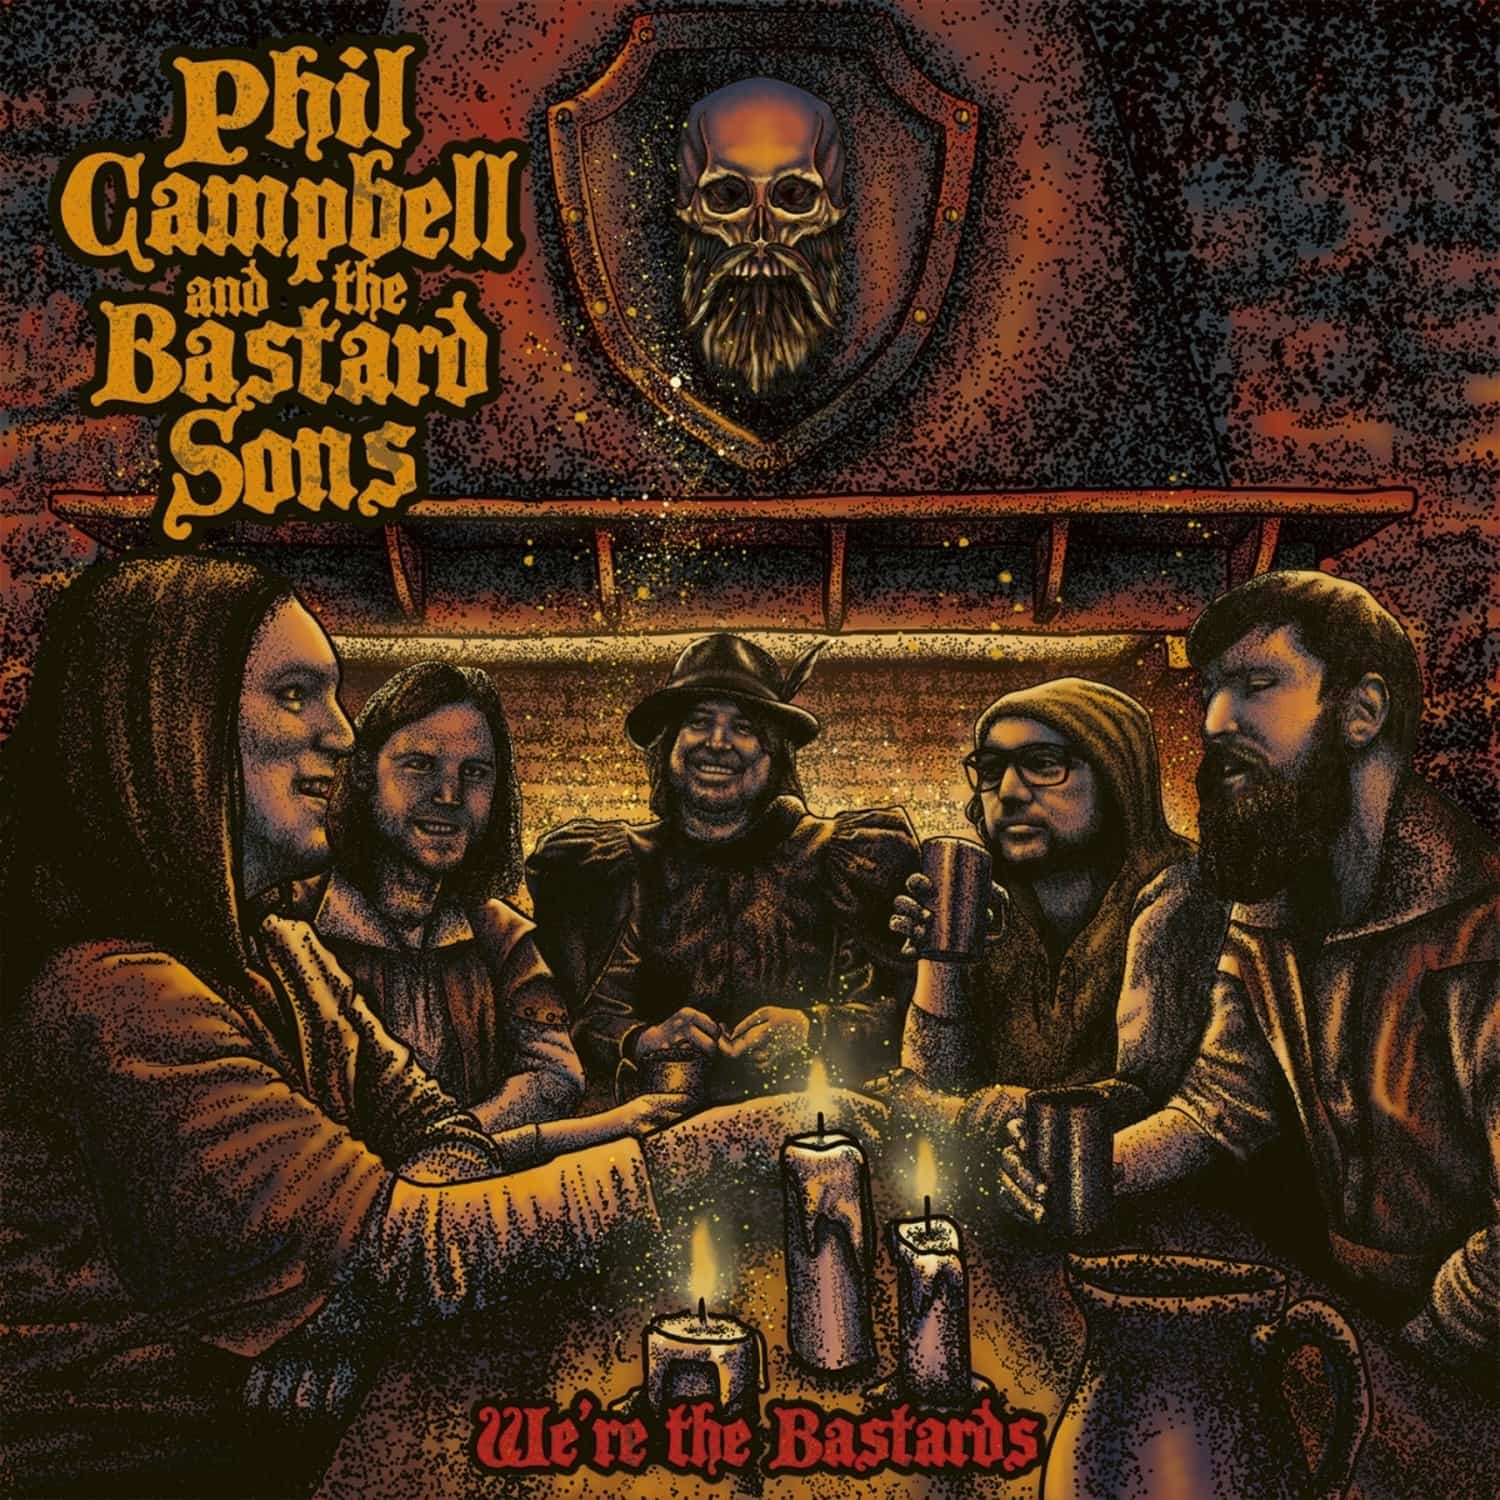 Phil and the Bastard Sons Campbell - WE RE THE BASTARDS 